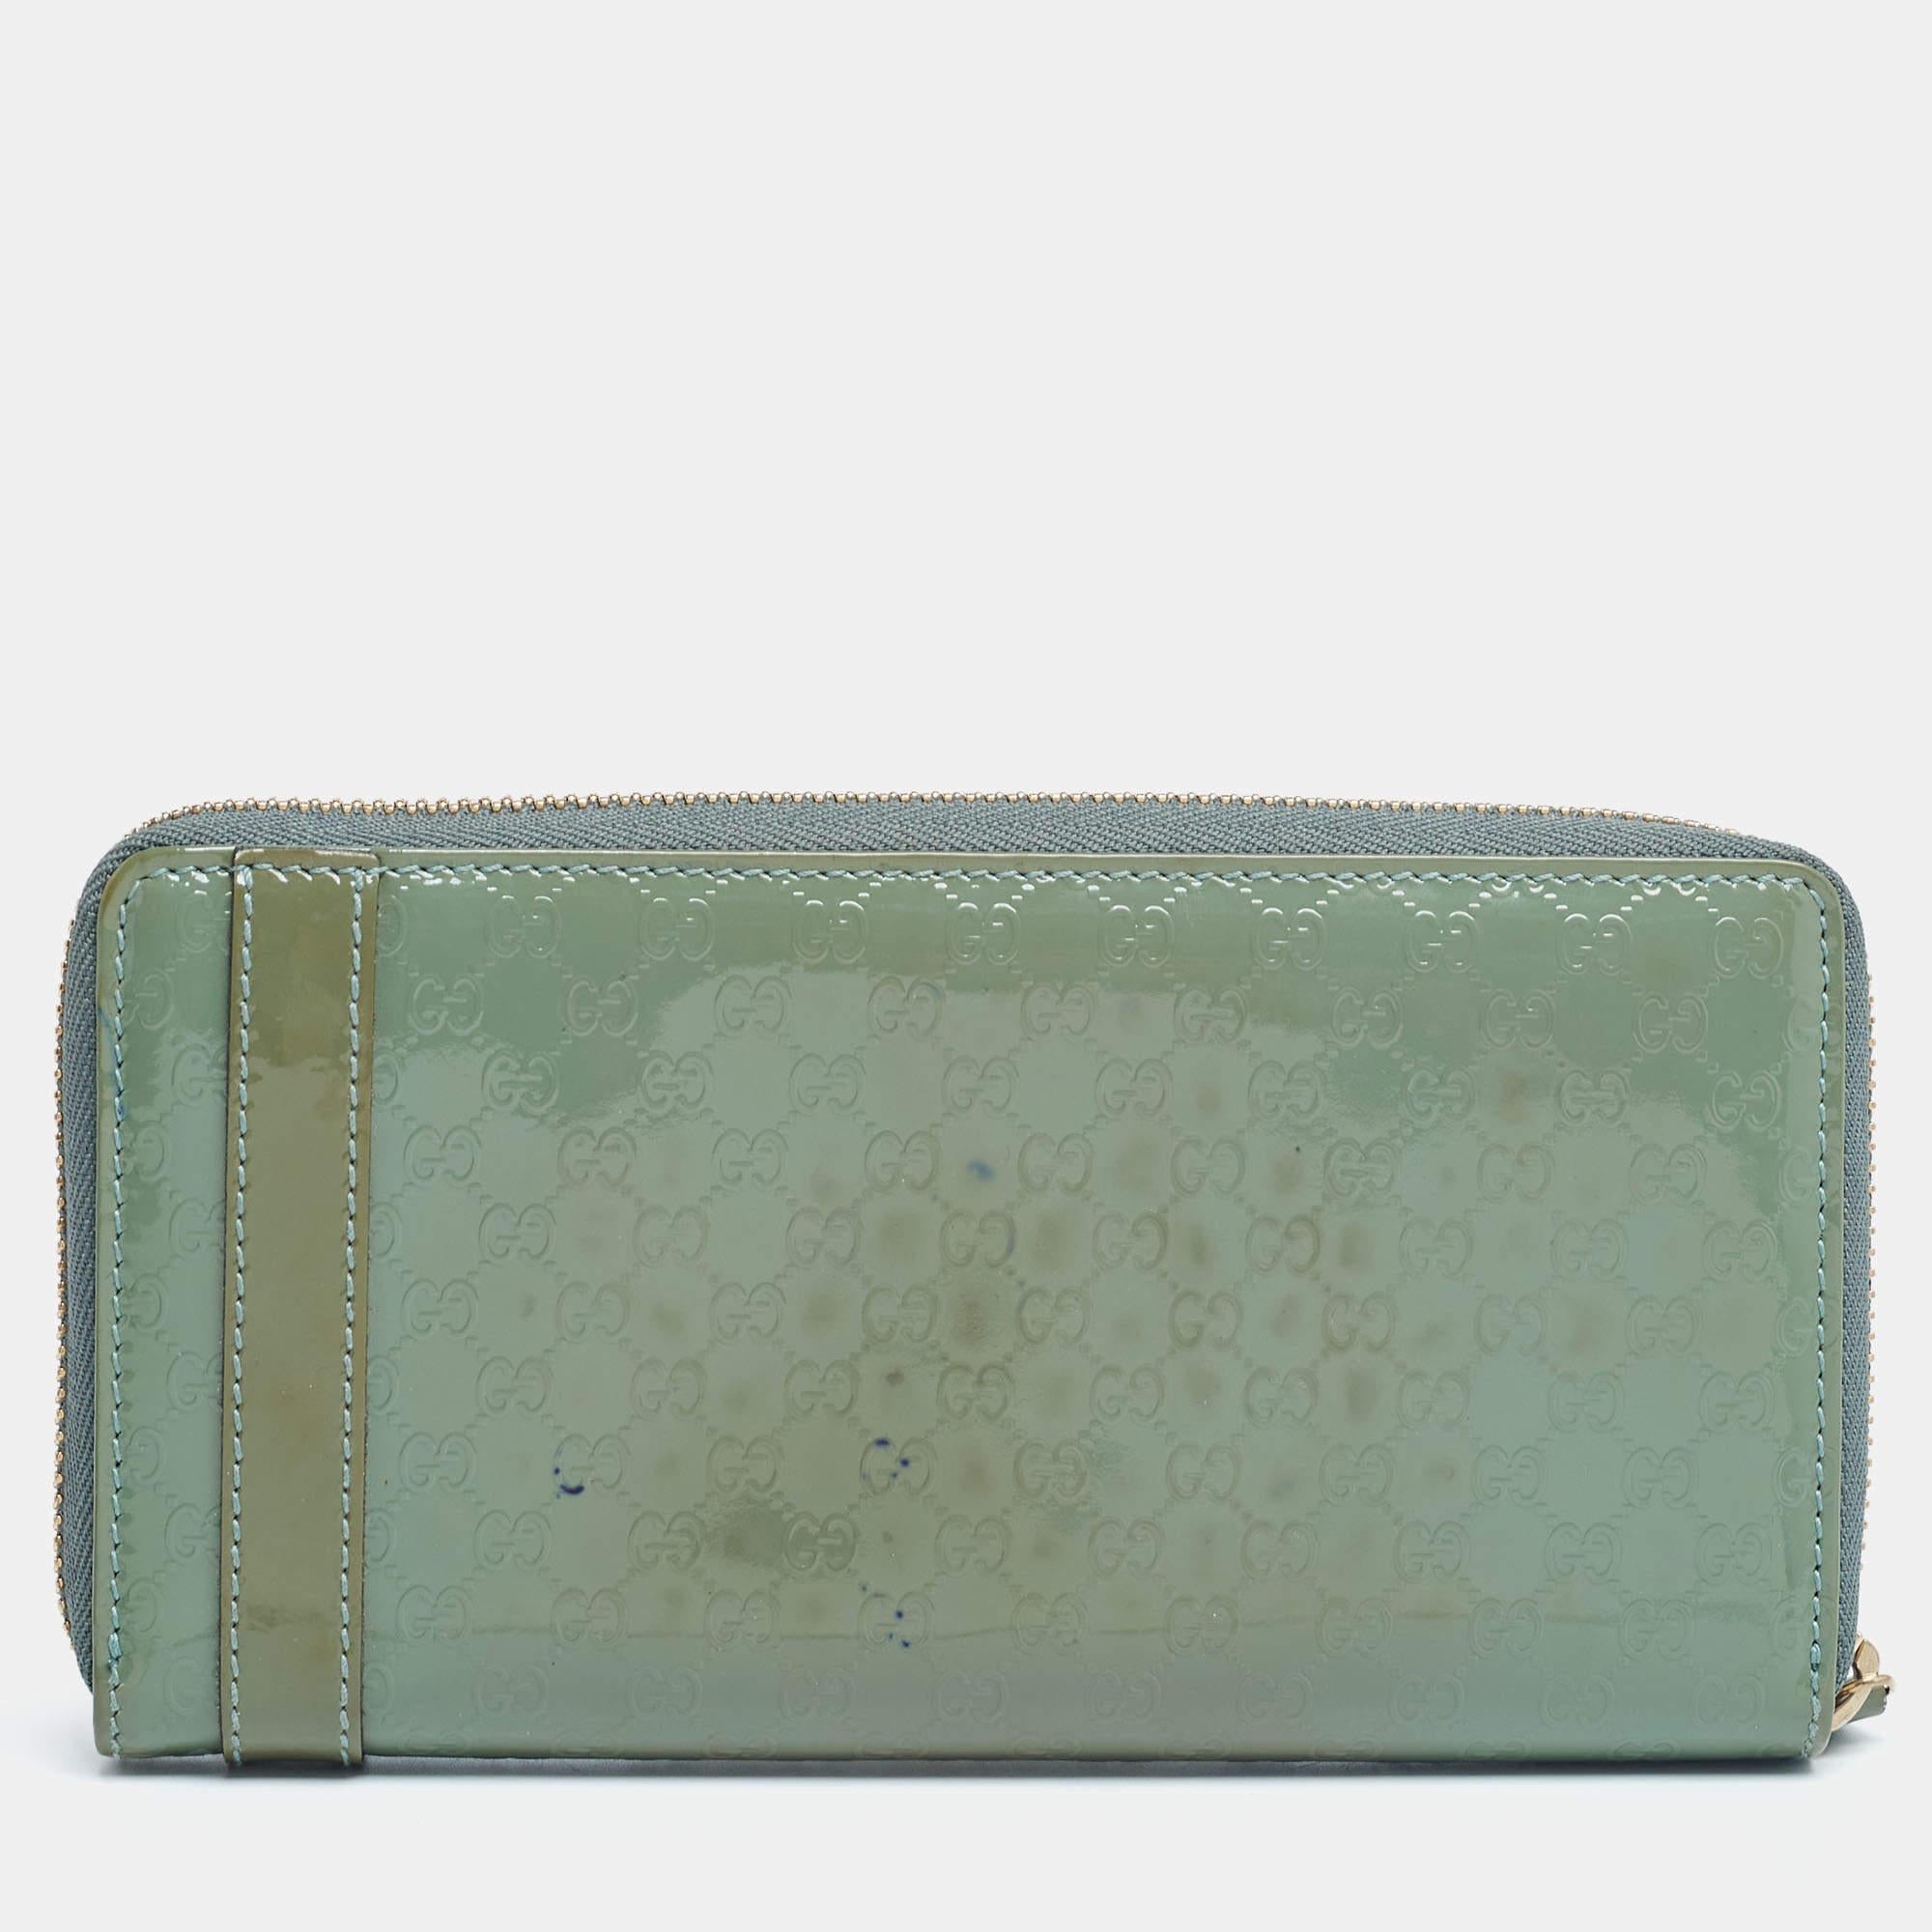 Gray Gucci Green Microguccissima Patent Leather Zip Around Wallet For Sale